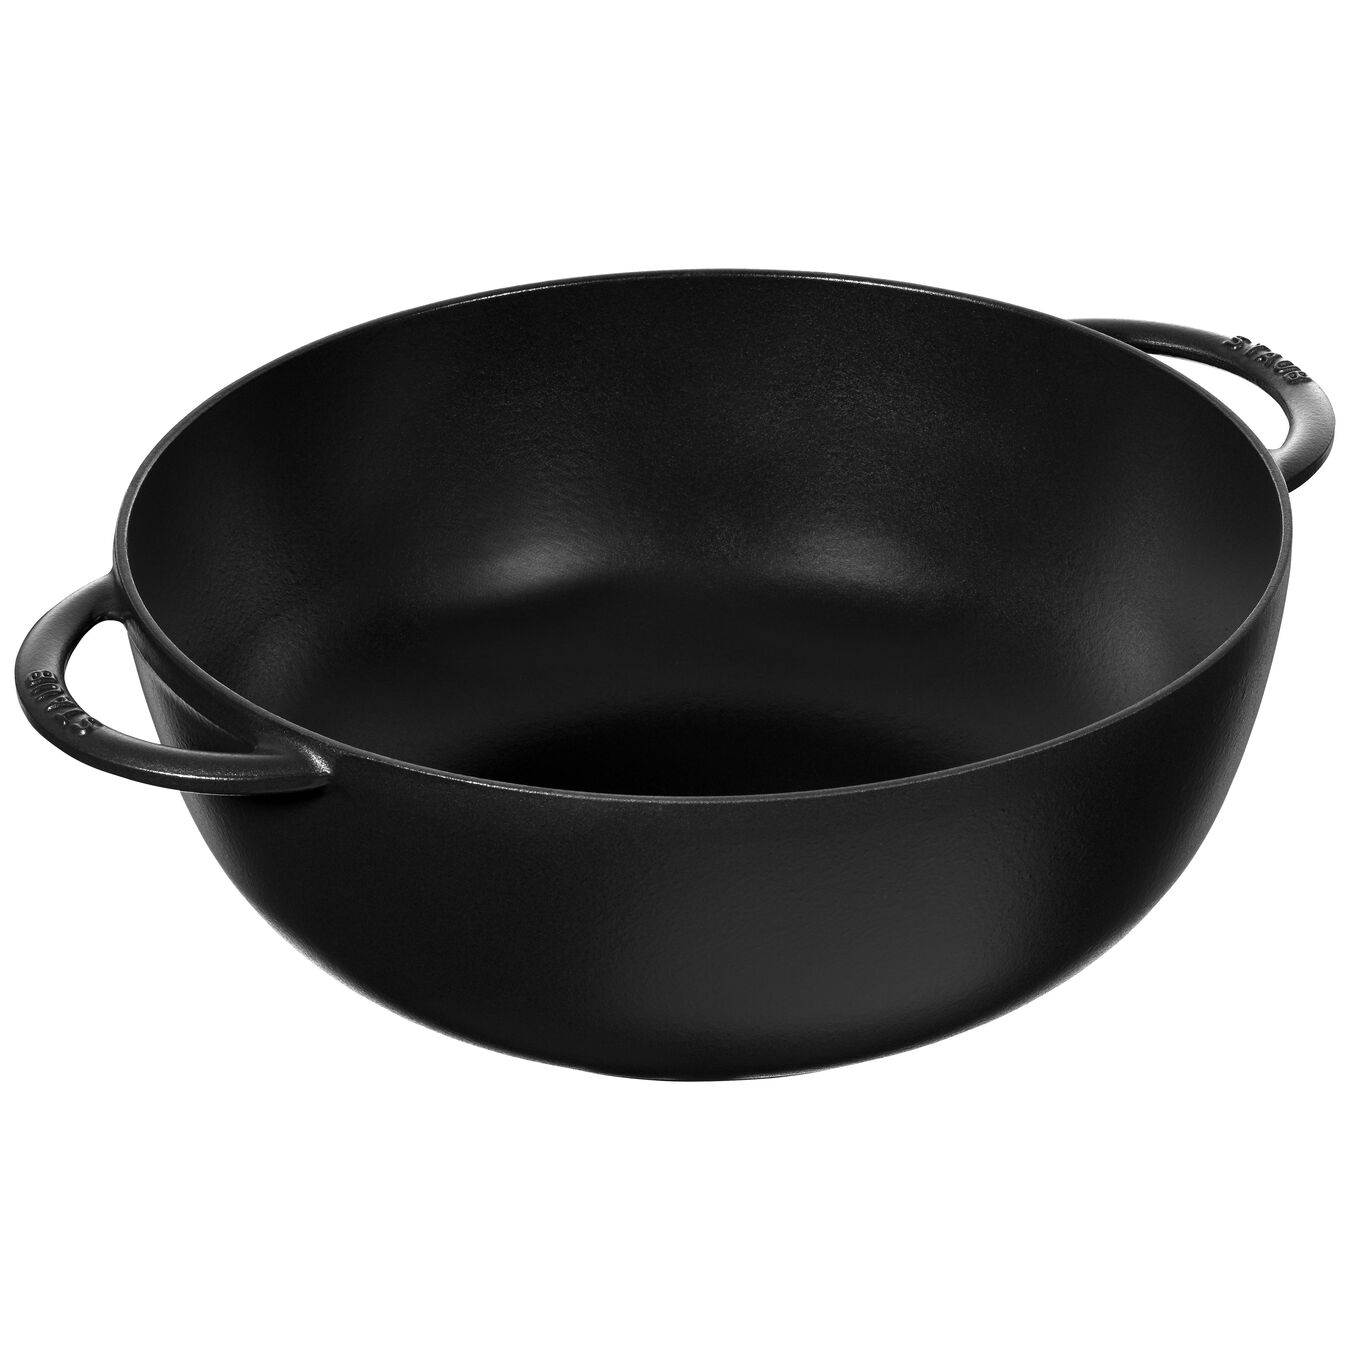 32 cm / 12.5 inch glass Wok, black - Visual Imperfections,,large 2